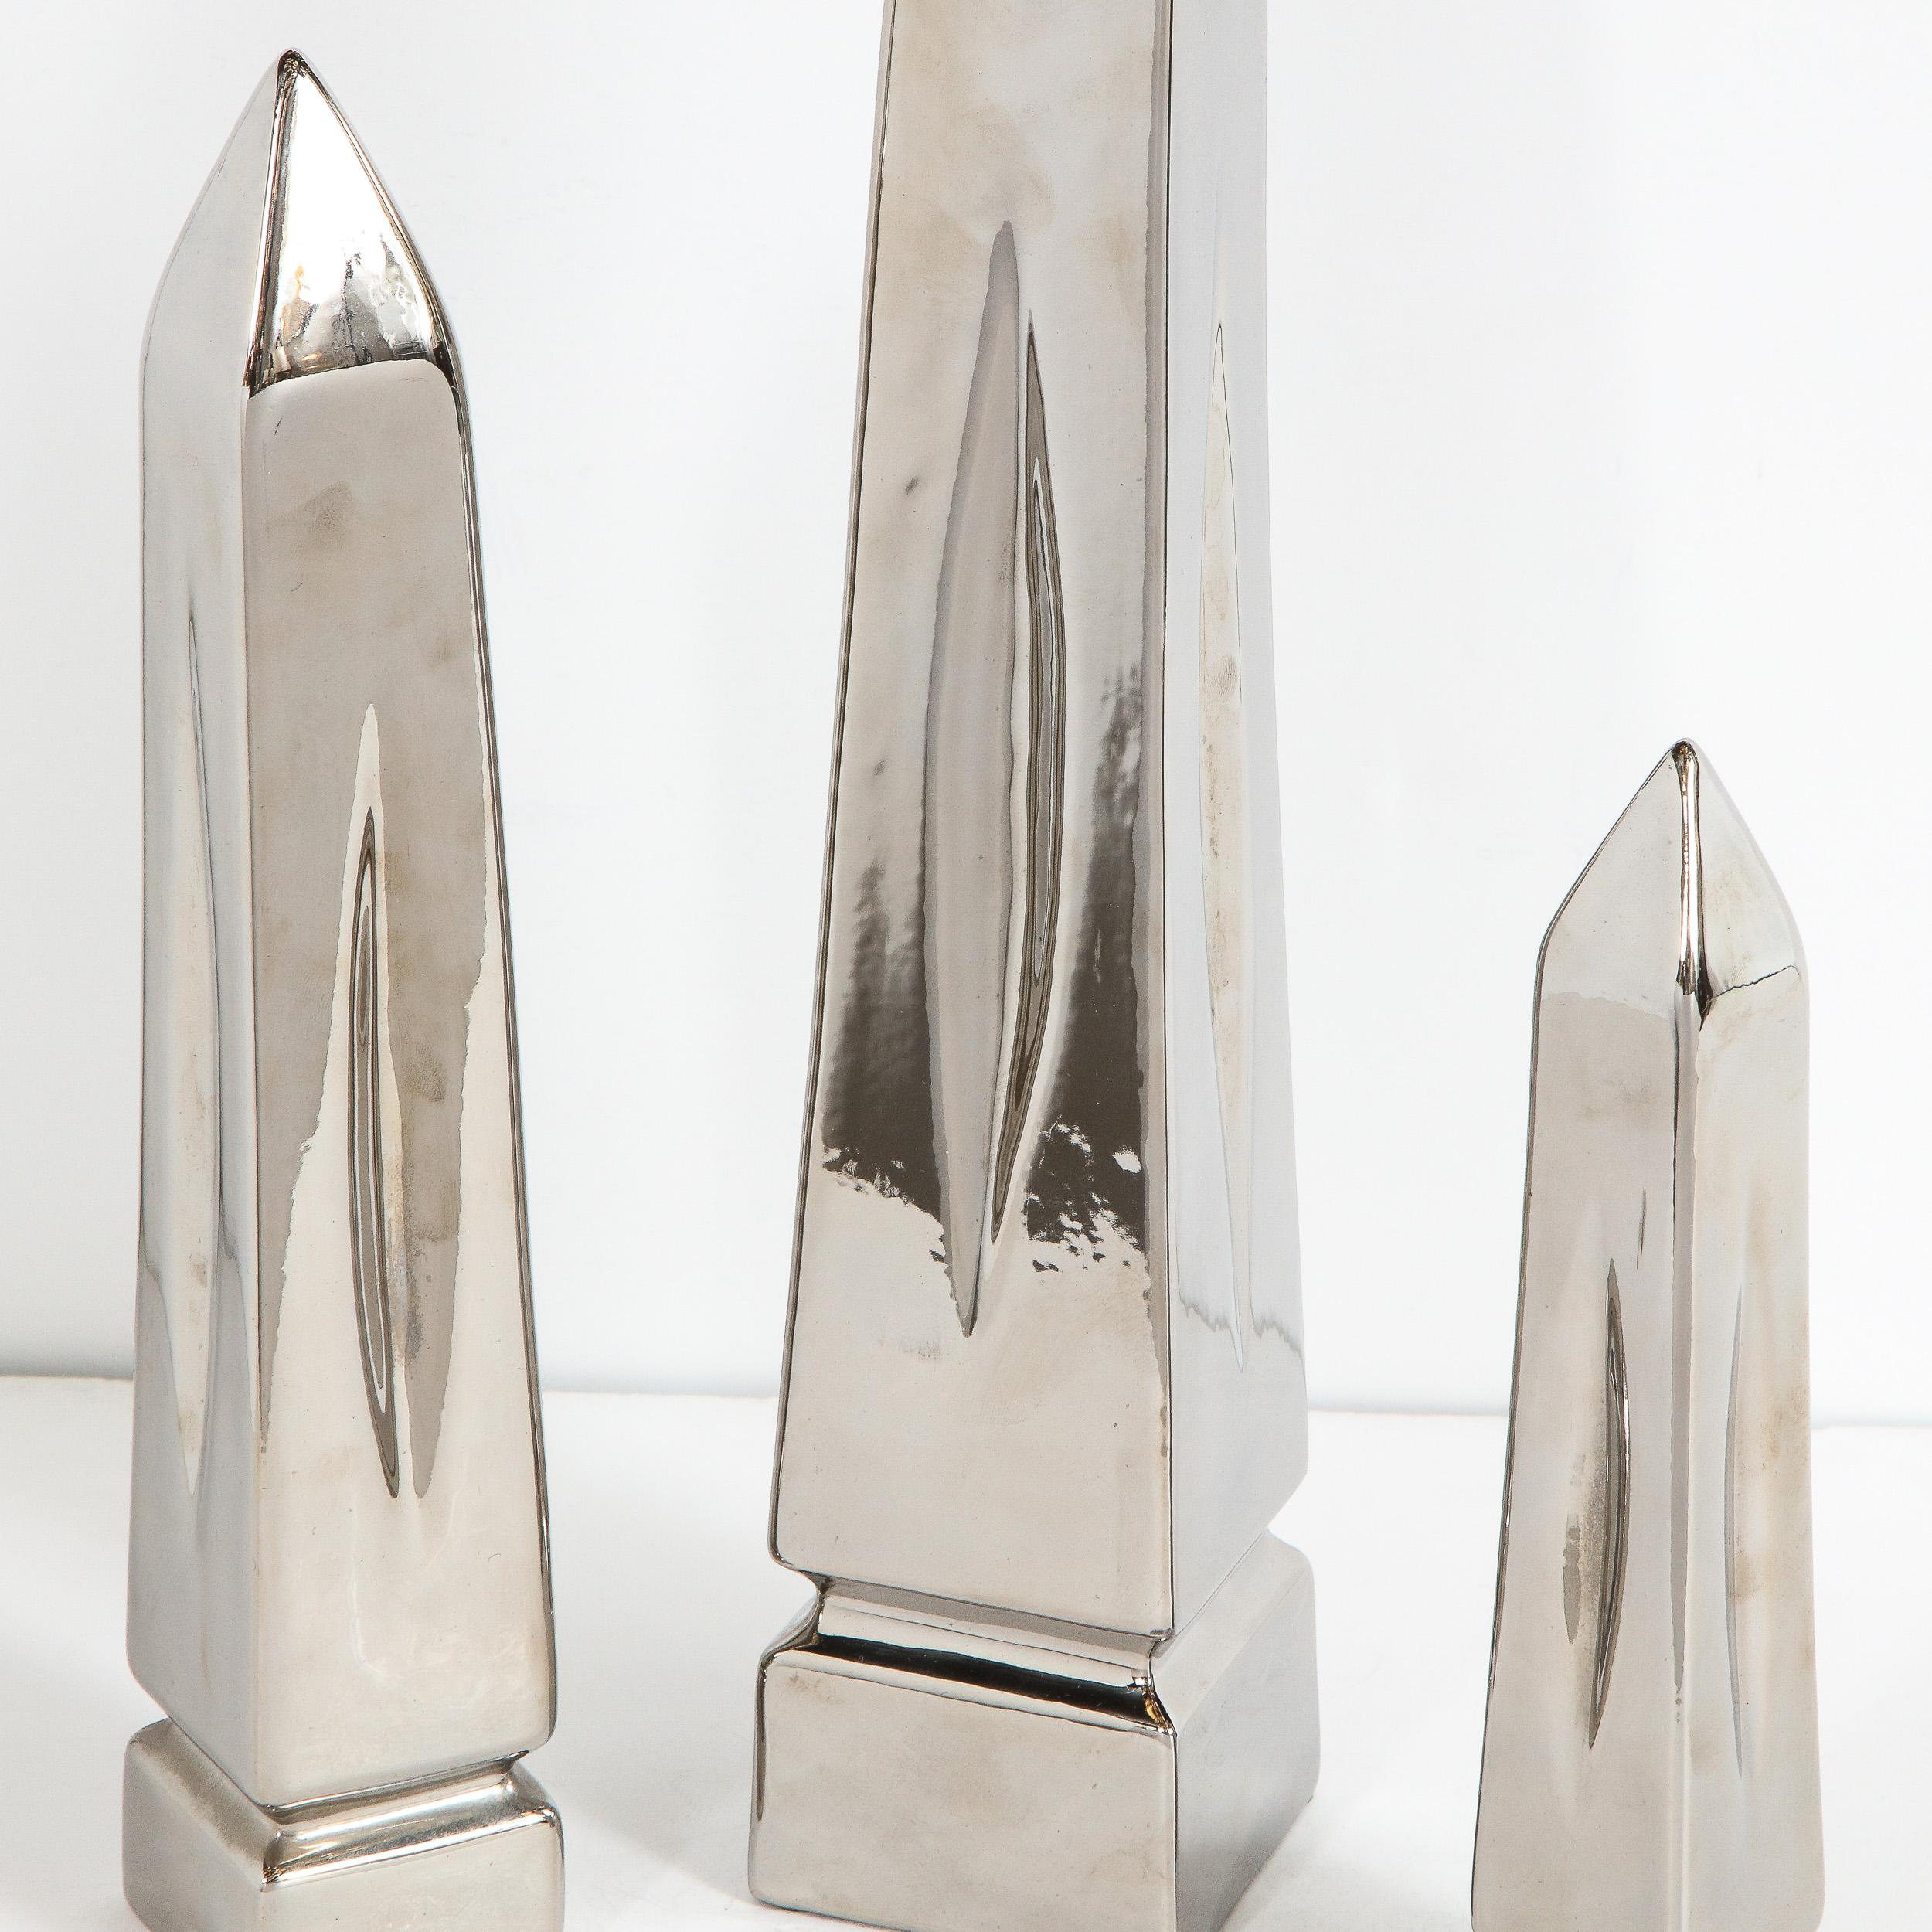 This stunning set of three obelisk sculptures were realized by Jaru in the United States, circa 1970. They feature obelisk forms with tapered bodies that come together at the top forming a point; an incised indentation near the volumetric